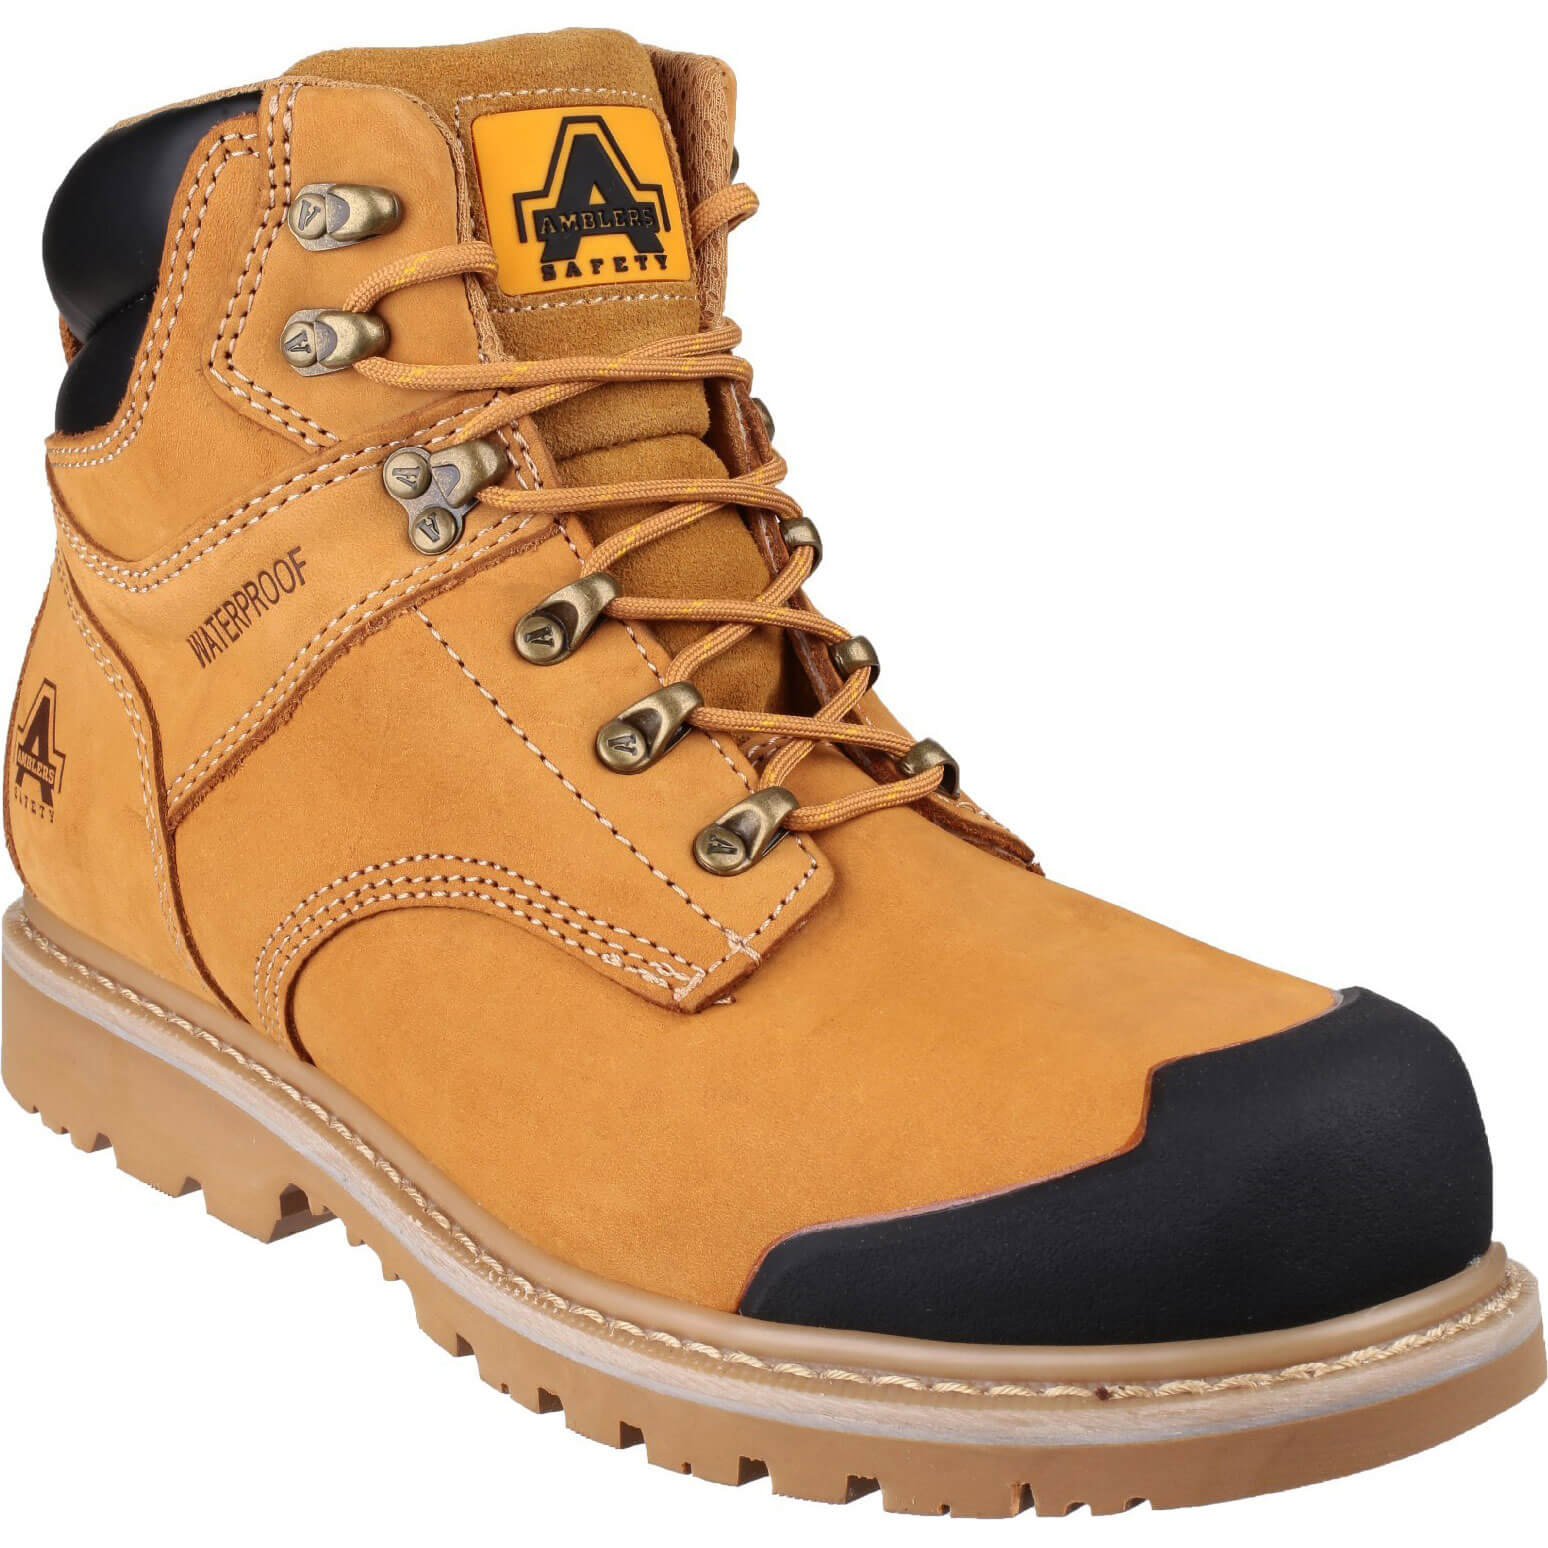 Photo of Amblers Mens Safety Fs226 Goodyear Welted Waterproof Industrial Safety Boots Honey Size 8